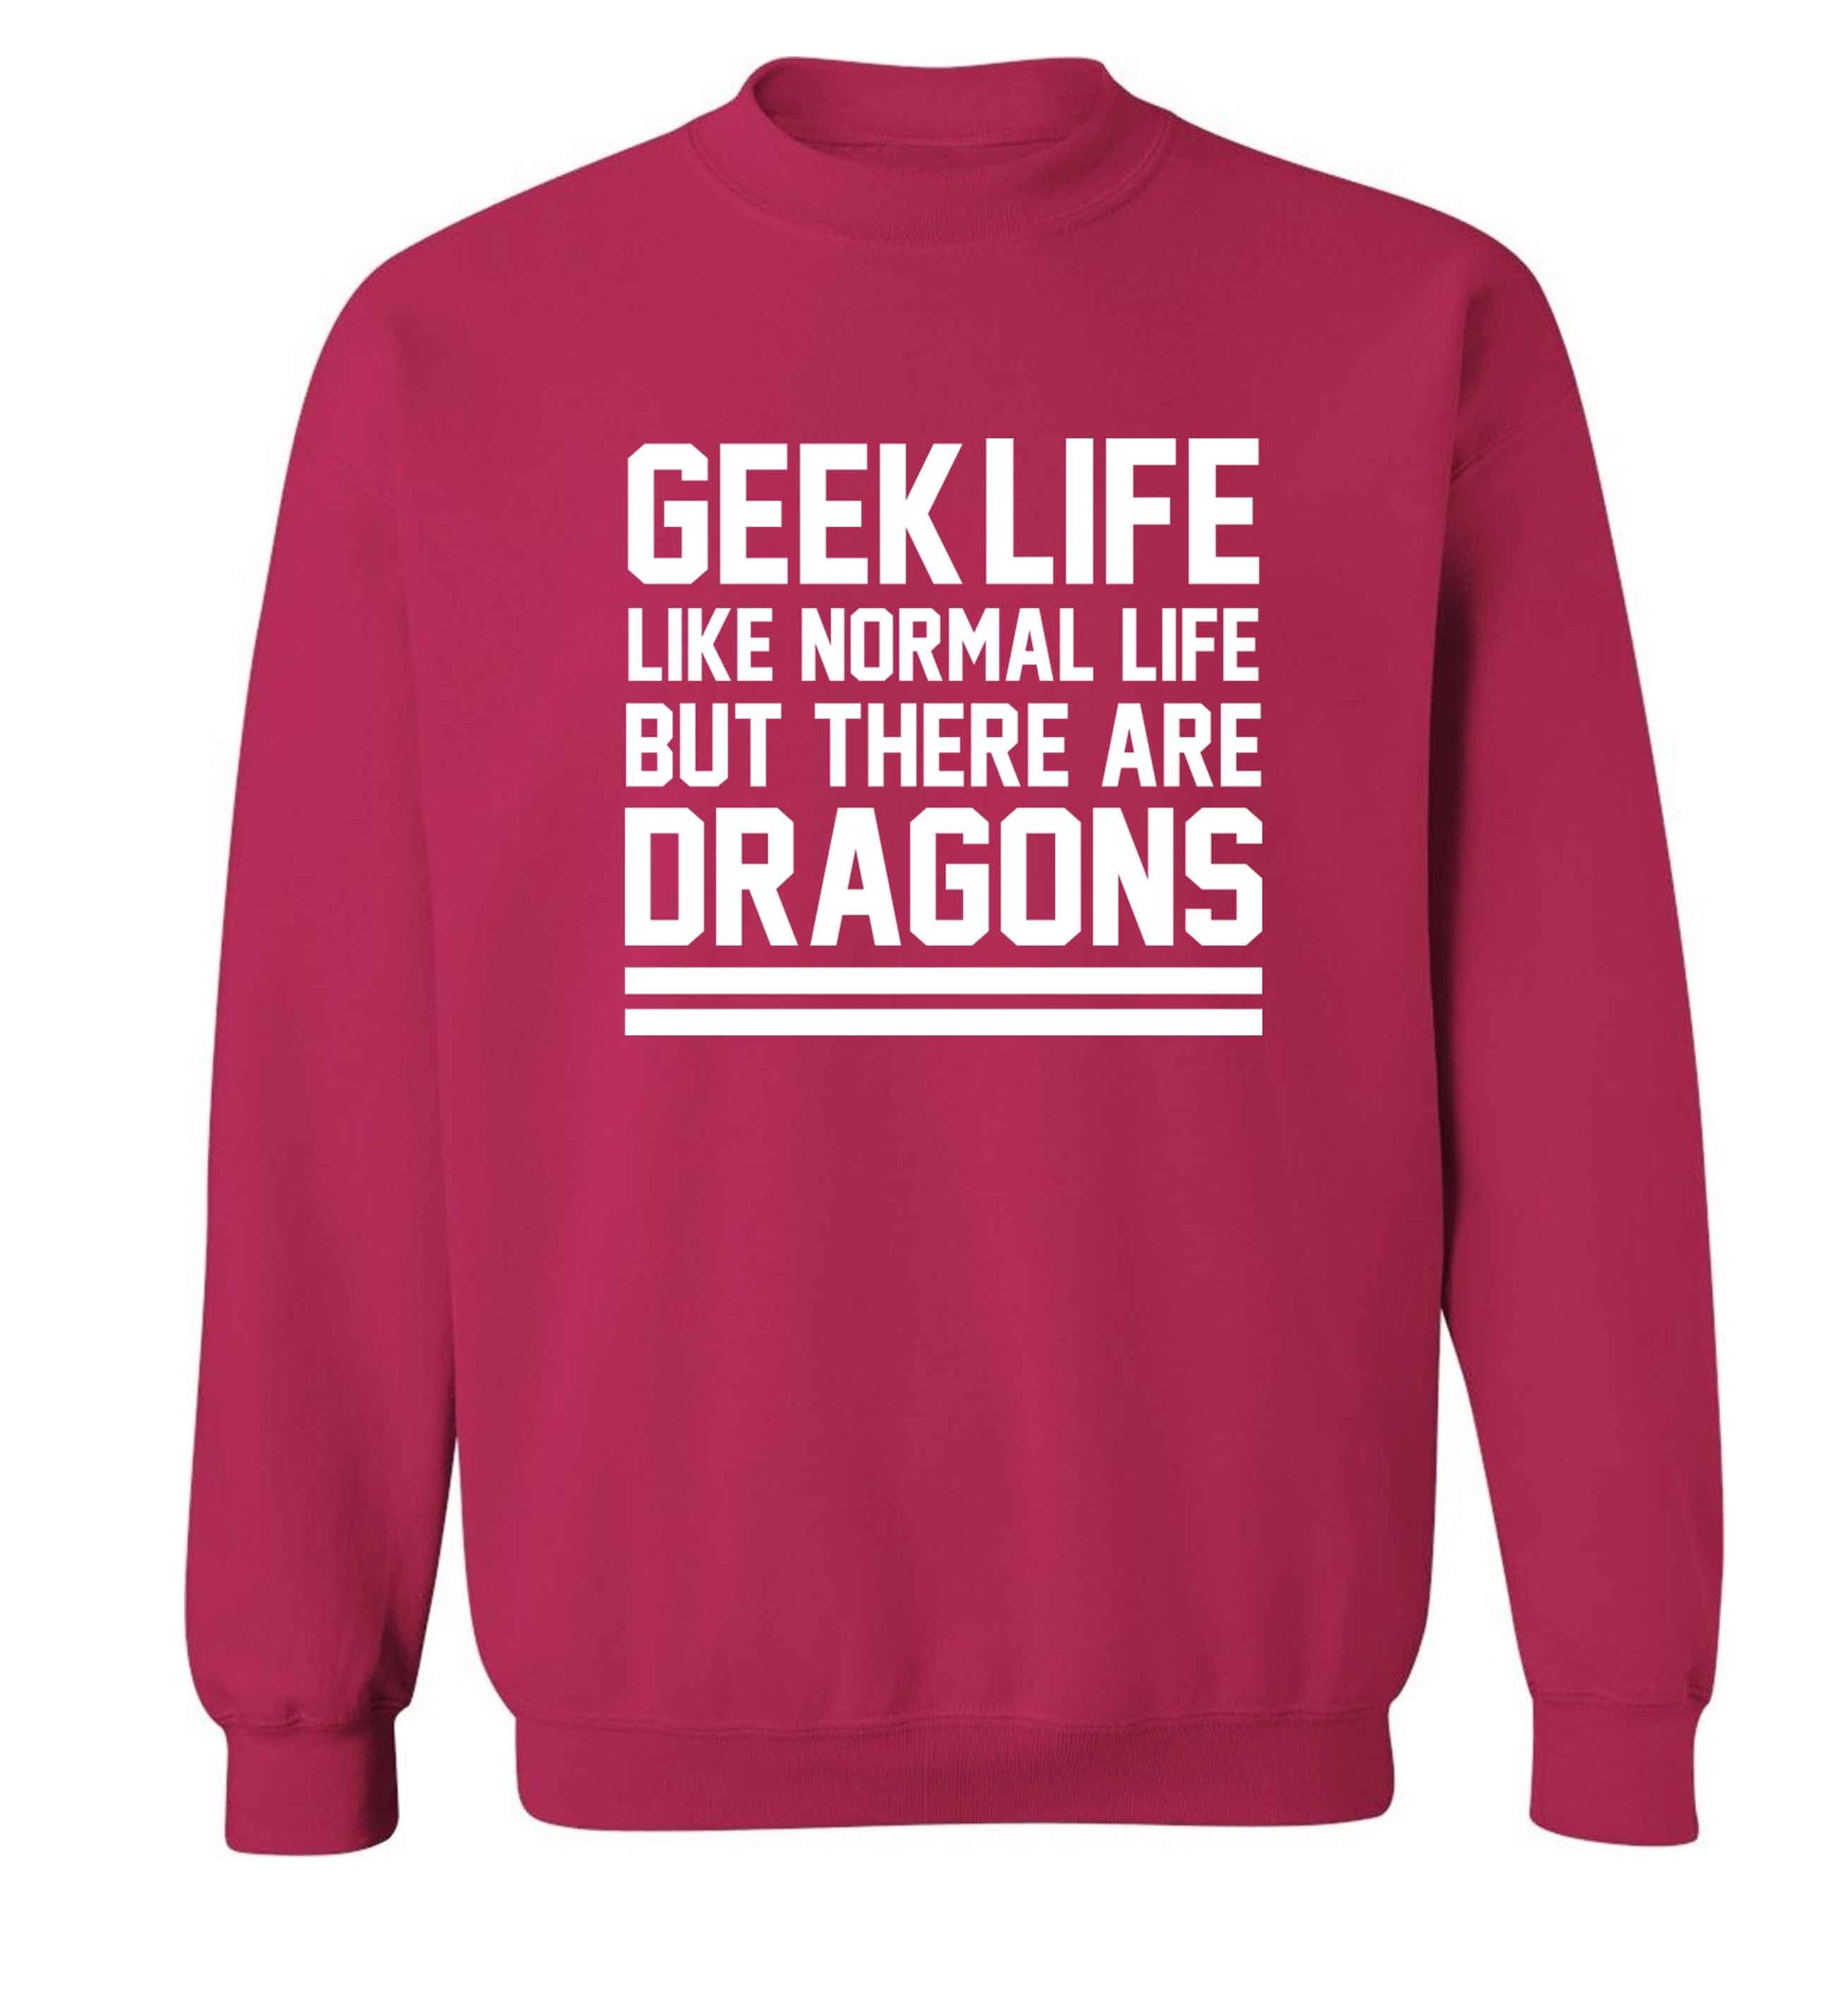 Geek life like normal life but there are dragons adult's unisex pink sweater 2XL